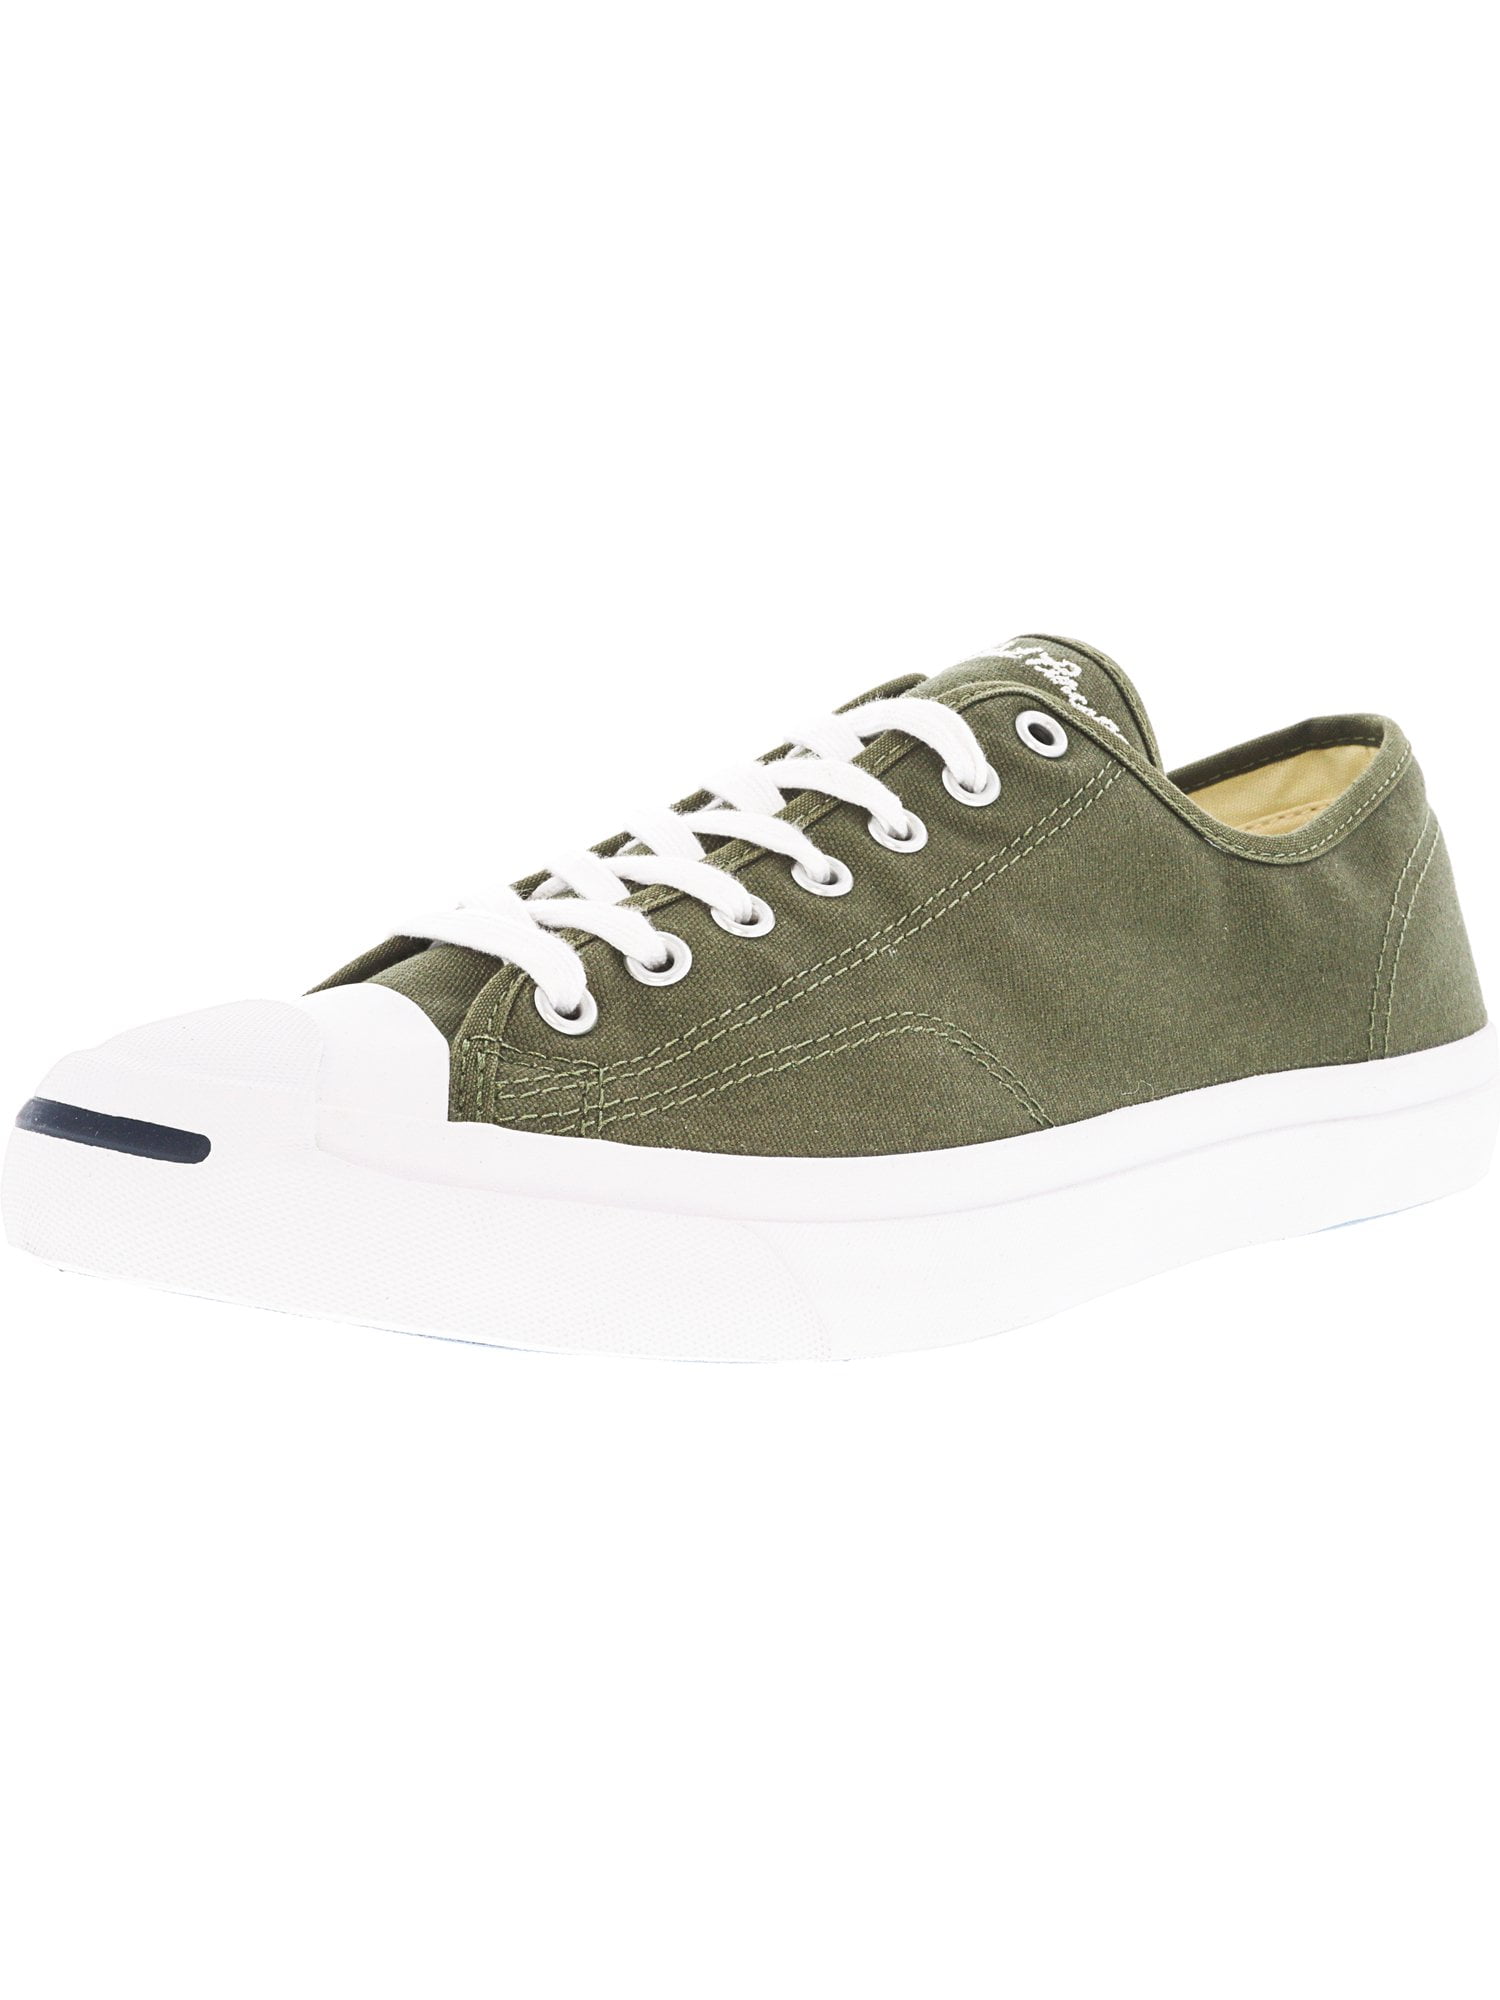 Converse Jp Jack Ox Medium Olive / Natural White Ankle-High Canvas ...